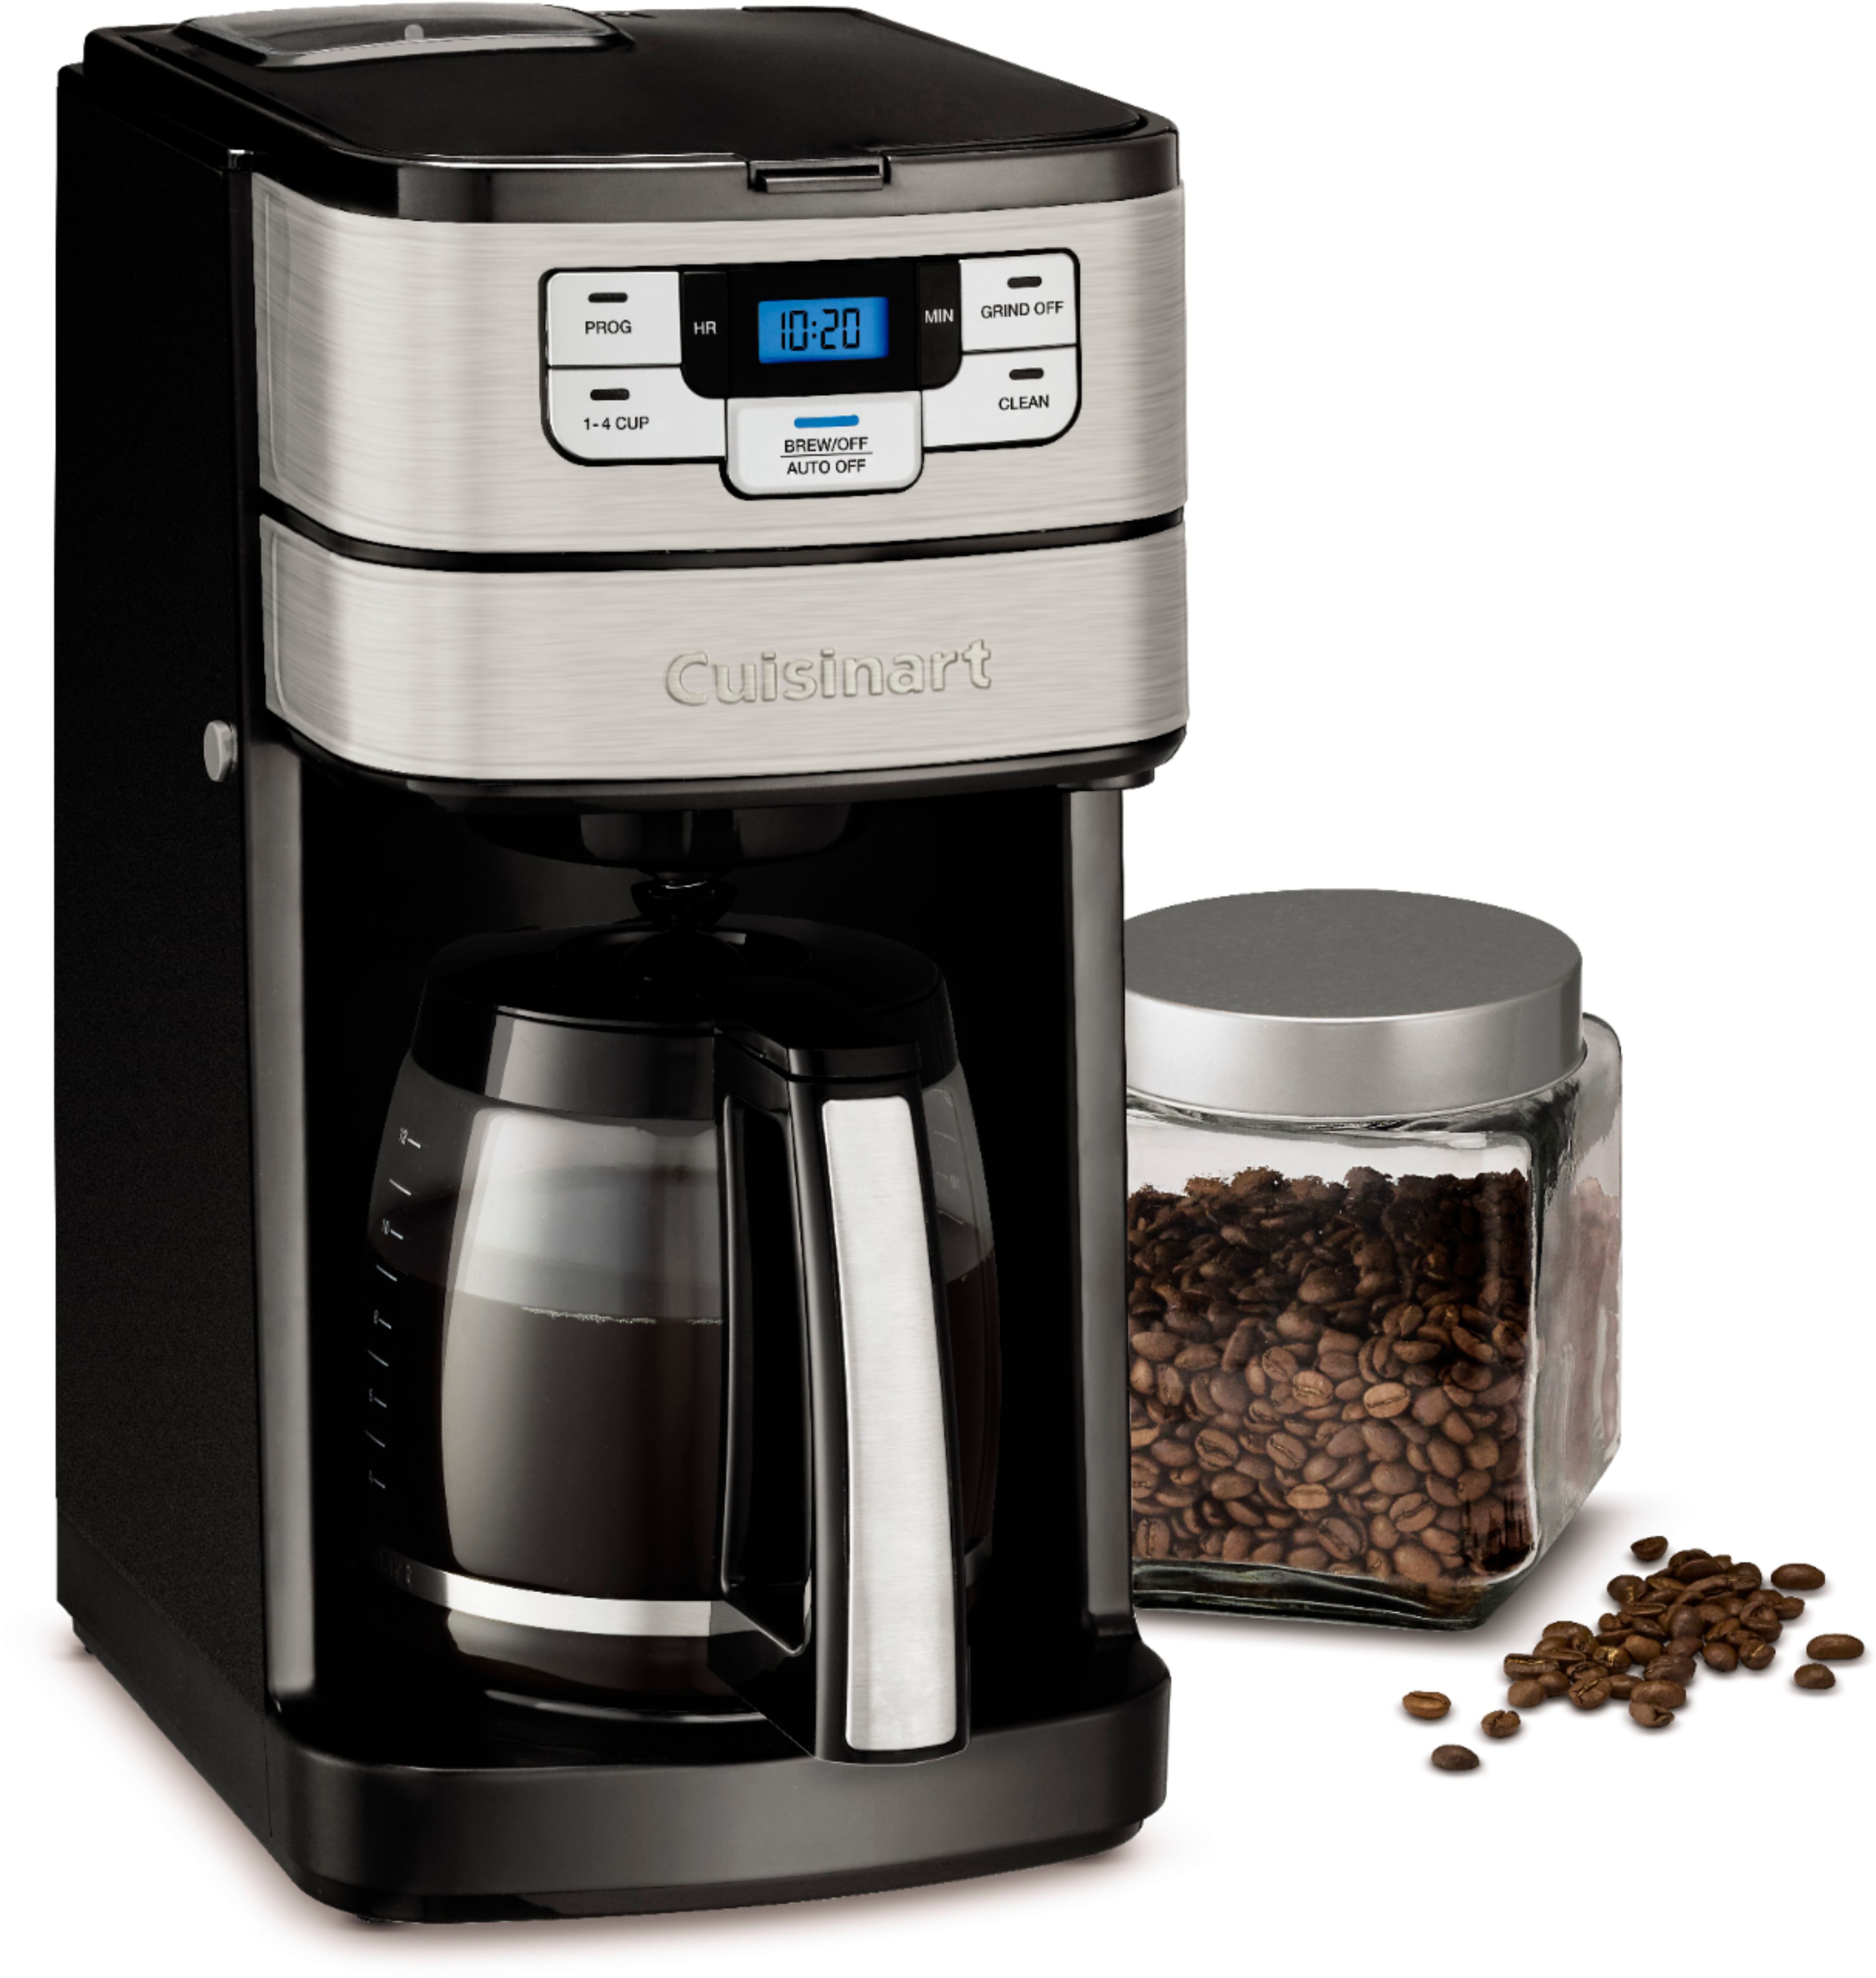 Best Buy: CHEFMAN 12-Cup Coffee Maker with Digital Electric Brewer  Stainless Steel RJ14-12-SQ